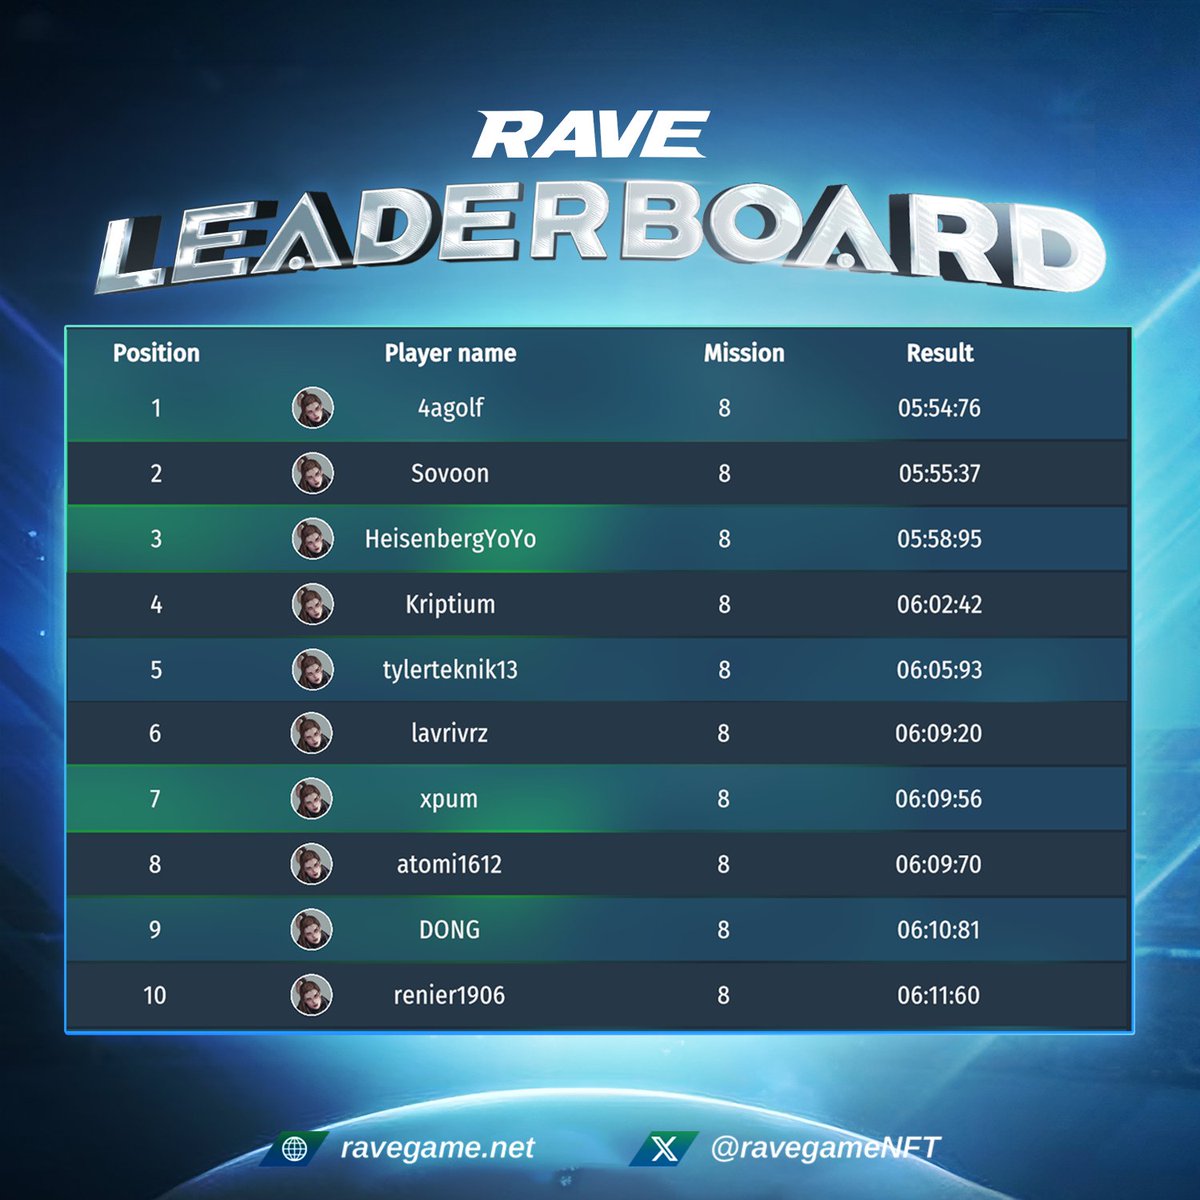 🏆 The thrill of victory and the rush of the leaderboard!
 
Congratulations to our top 10 racers who are dominating the tracks and paving their way to glory! 🚗💨
Don't miss your chance! Download at 👉  ravegame.net

$RAVE #Rave #AlphaTest